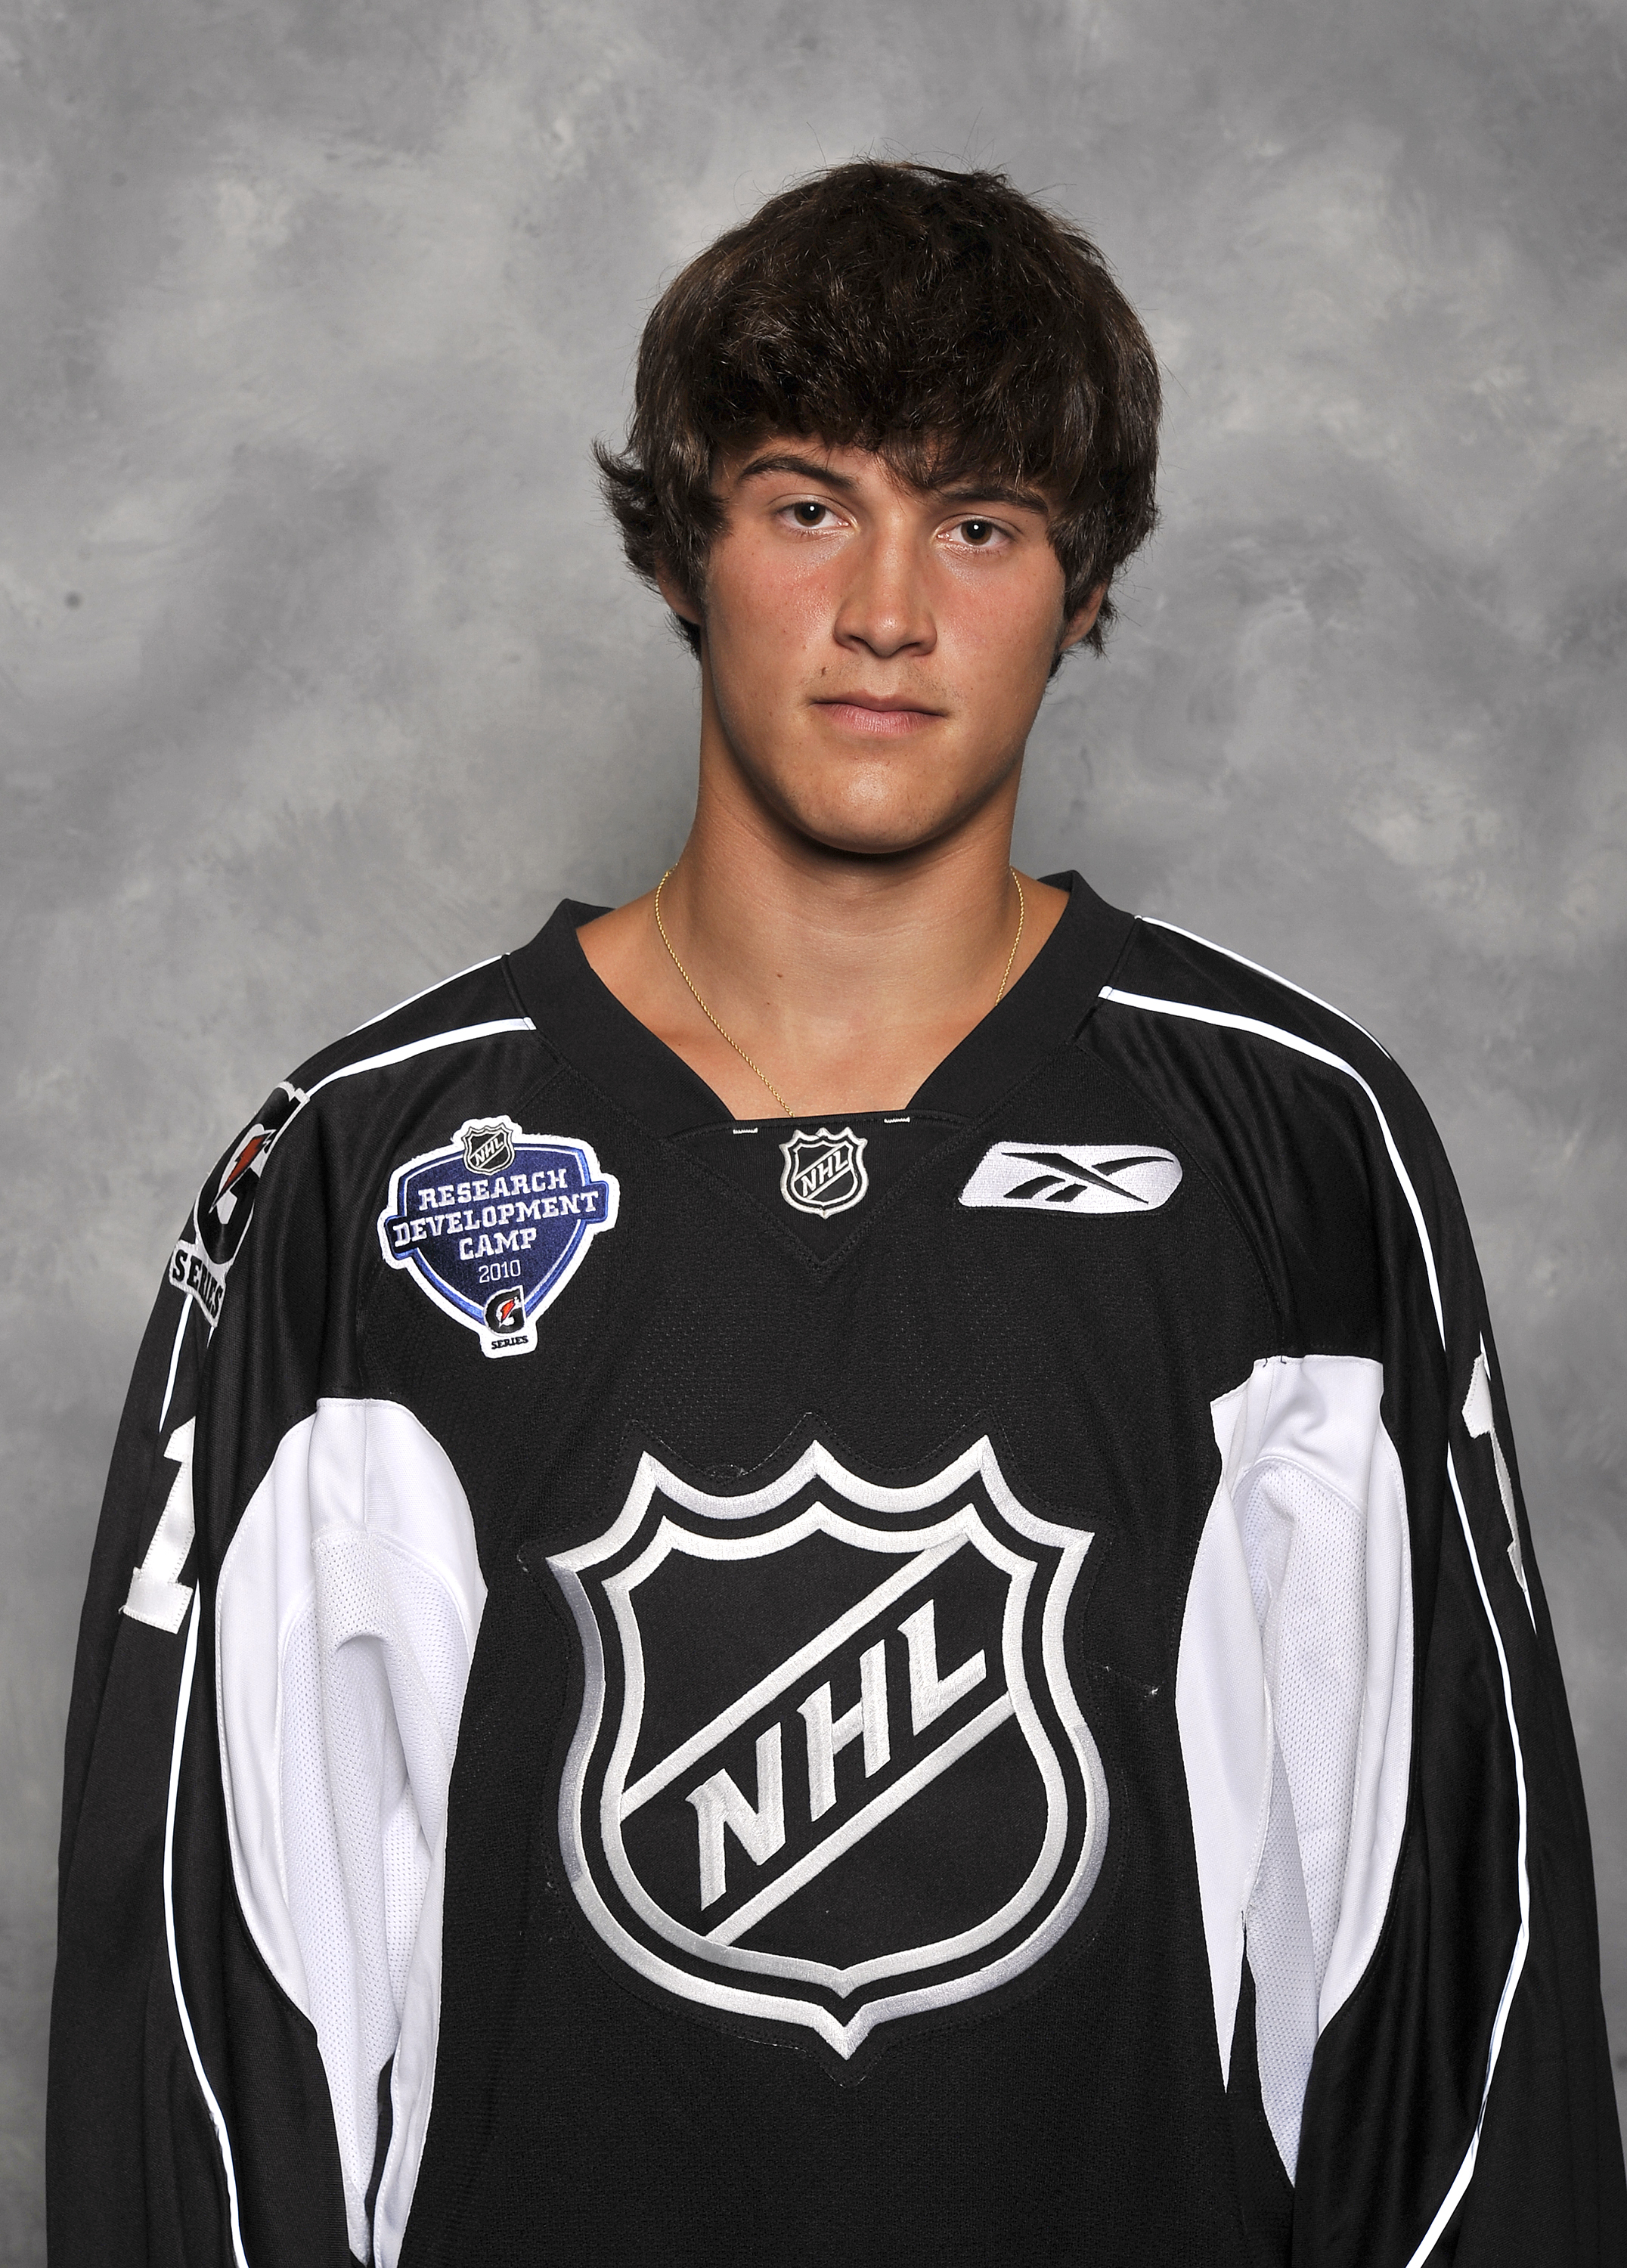 TORONTO - AUGUST 17: John Gibson poses for a portrait during the 2010 NHL Research, development and orientation camp at the Mastercard Centre for Hockey Excellence August 17, 2010 in Toronto, Ontario, Canada. (Photo by Graig Abel/Getty Images)